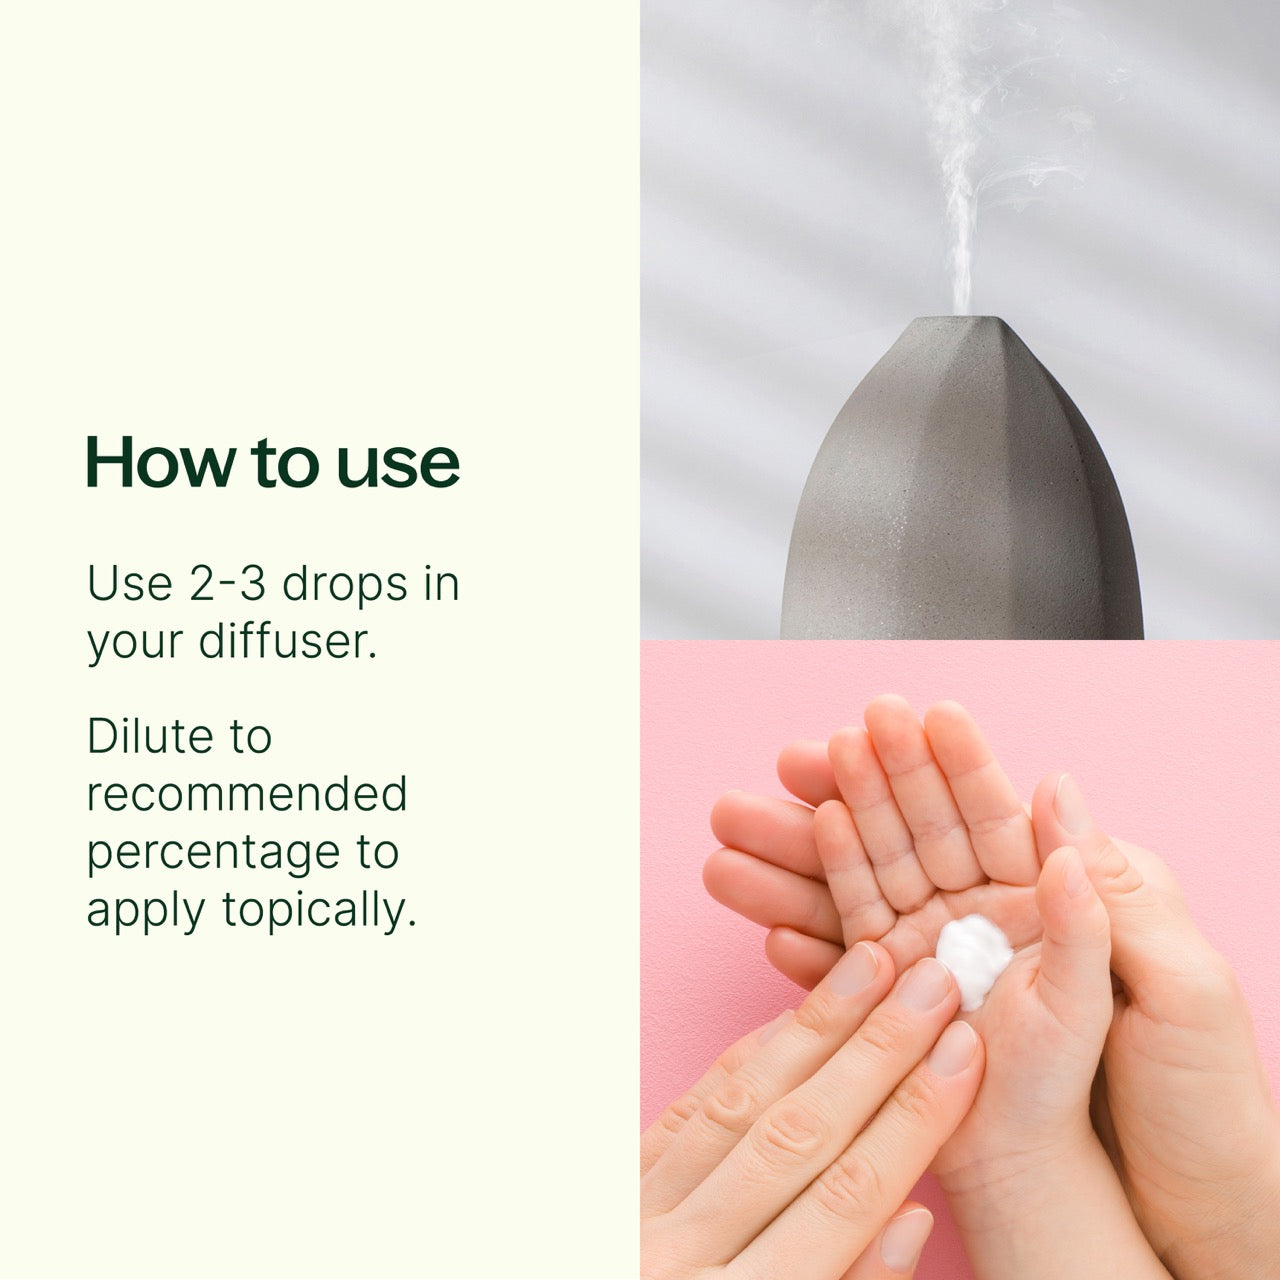 How to Use KidSafe Starter Pack 10 mL: use 2-3 drops in your diffuser OR dilute to recommended percentage to apply topically